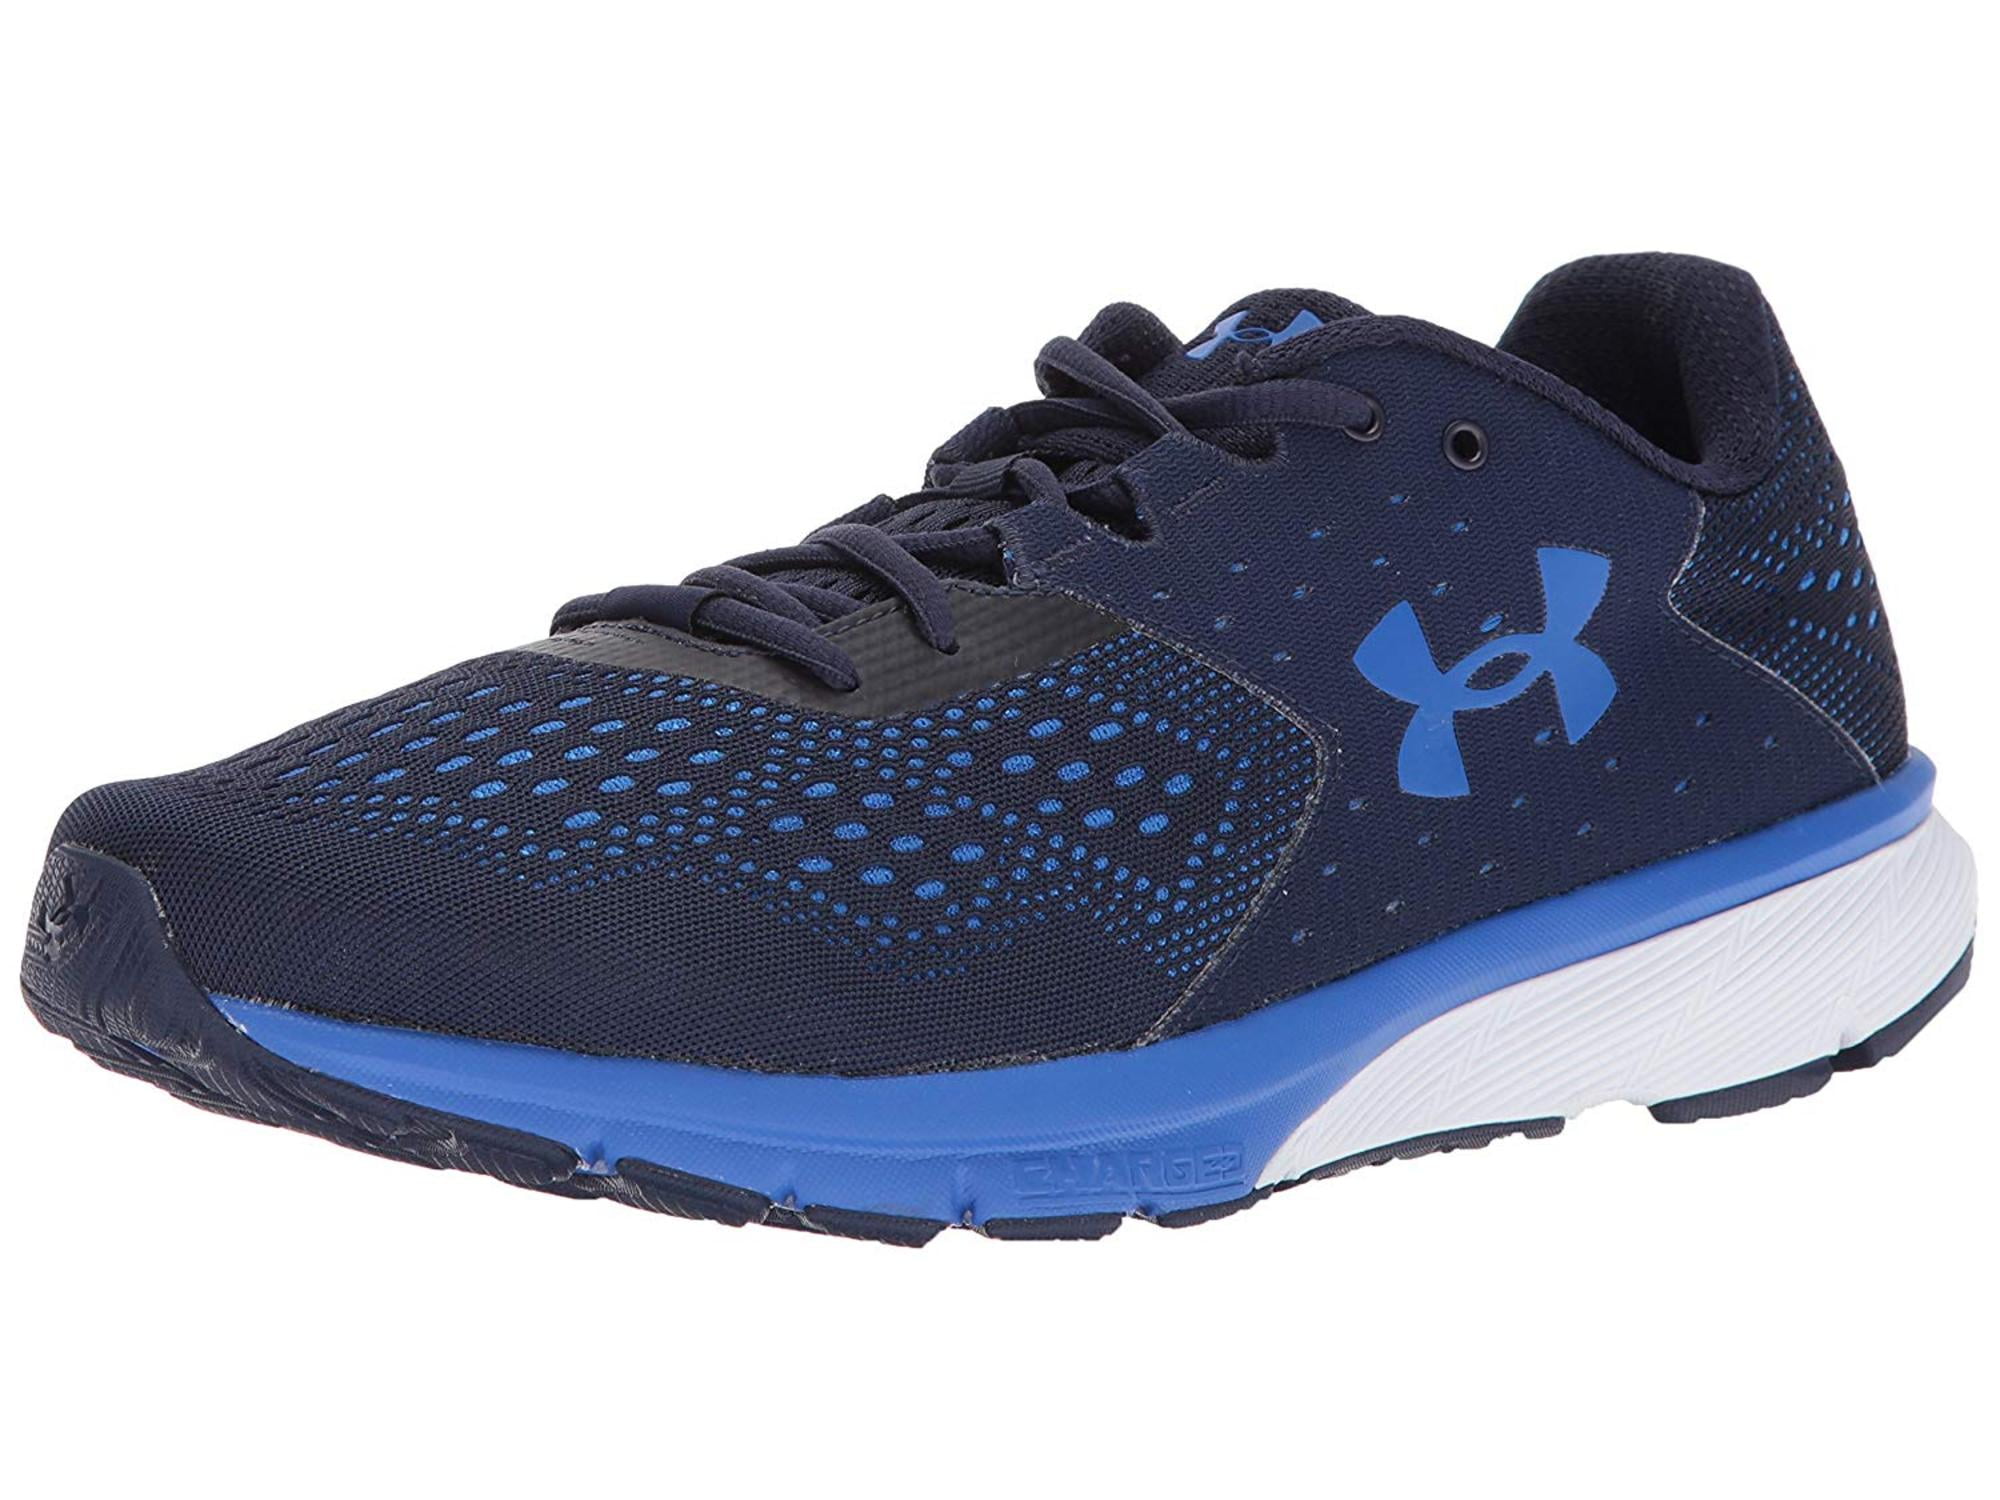 Under Armour Men's Charged Rebel 